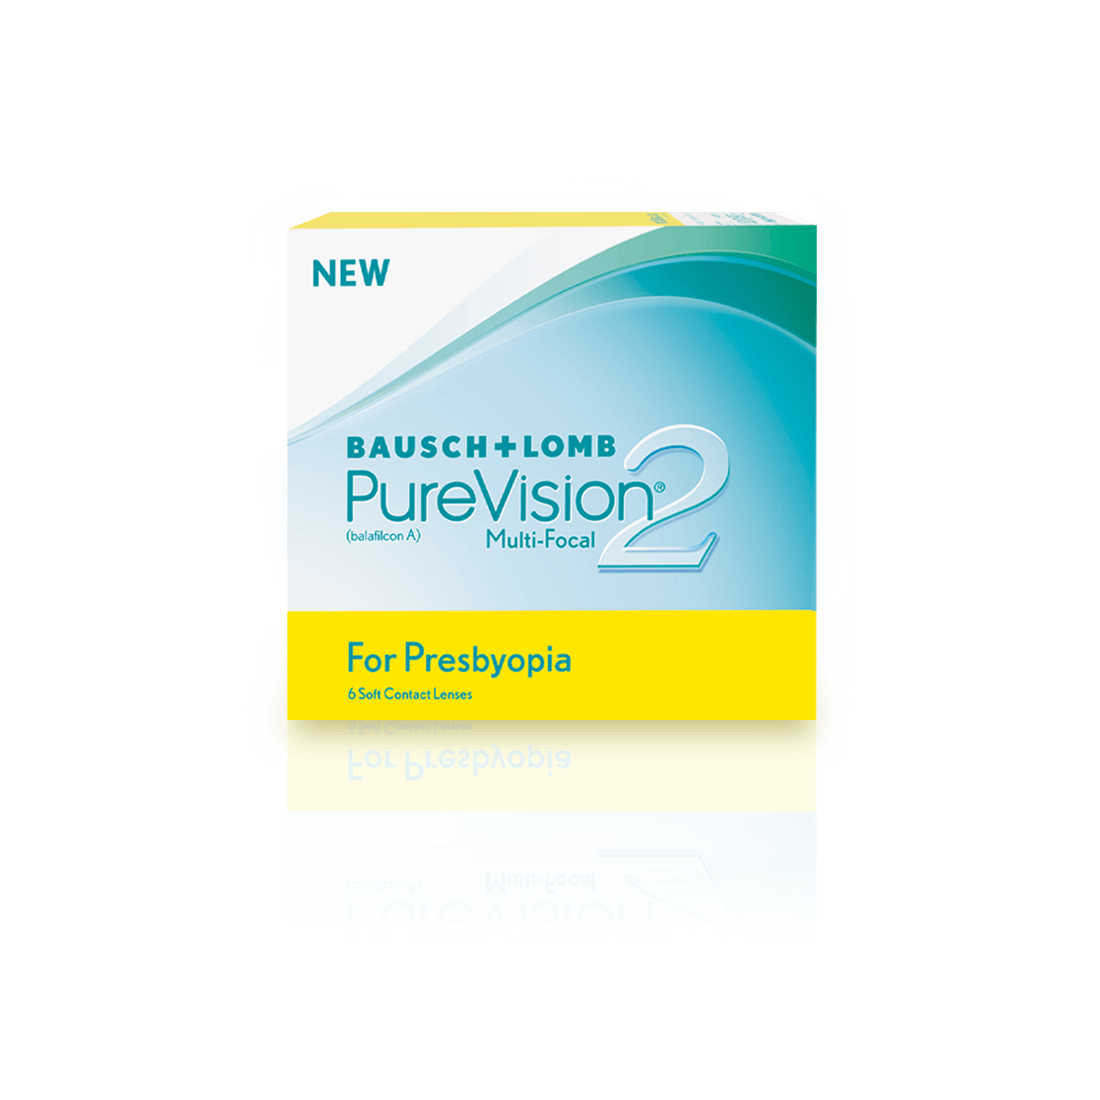 Bausch + Lomb PureVision® 2 for Presbyopia